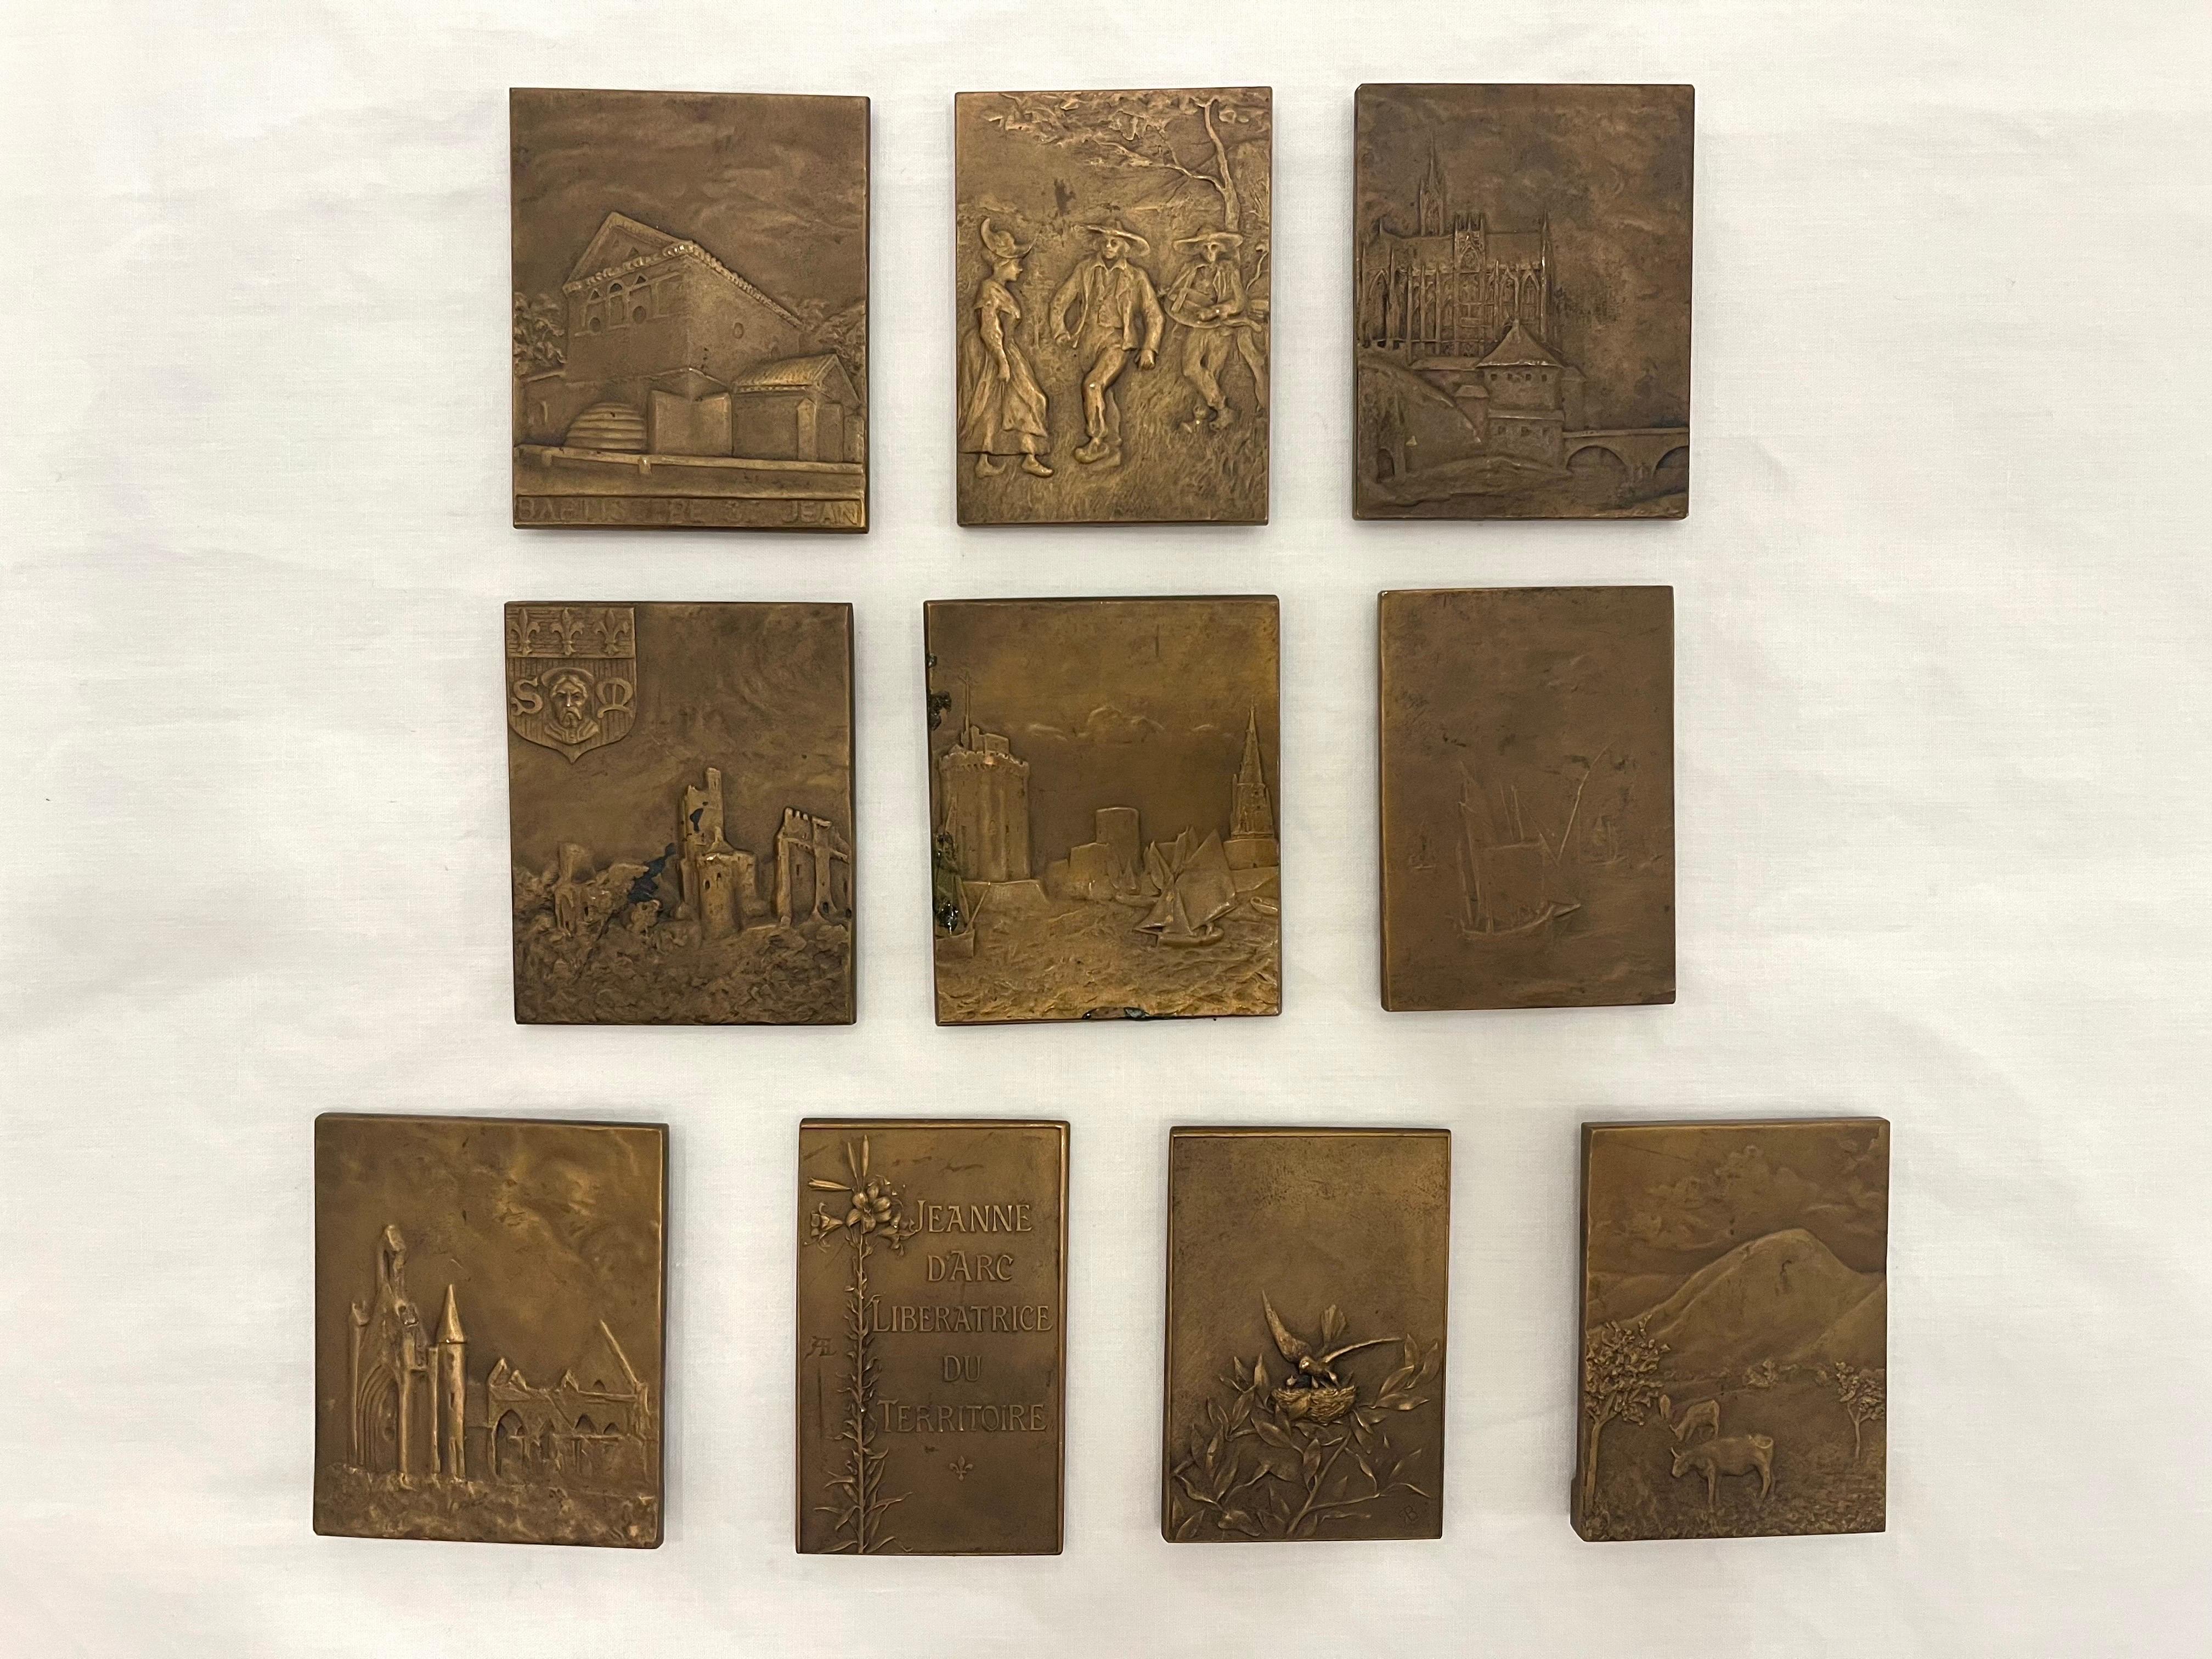 A collection of ten early 20th century medal size bronze bas relief sculptural plaques from France. Eight feature the beautiful headdresses of France. All eight are sculpted and created by the French artist Ernesta Robert-Merignac (1859-1933) whose